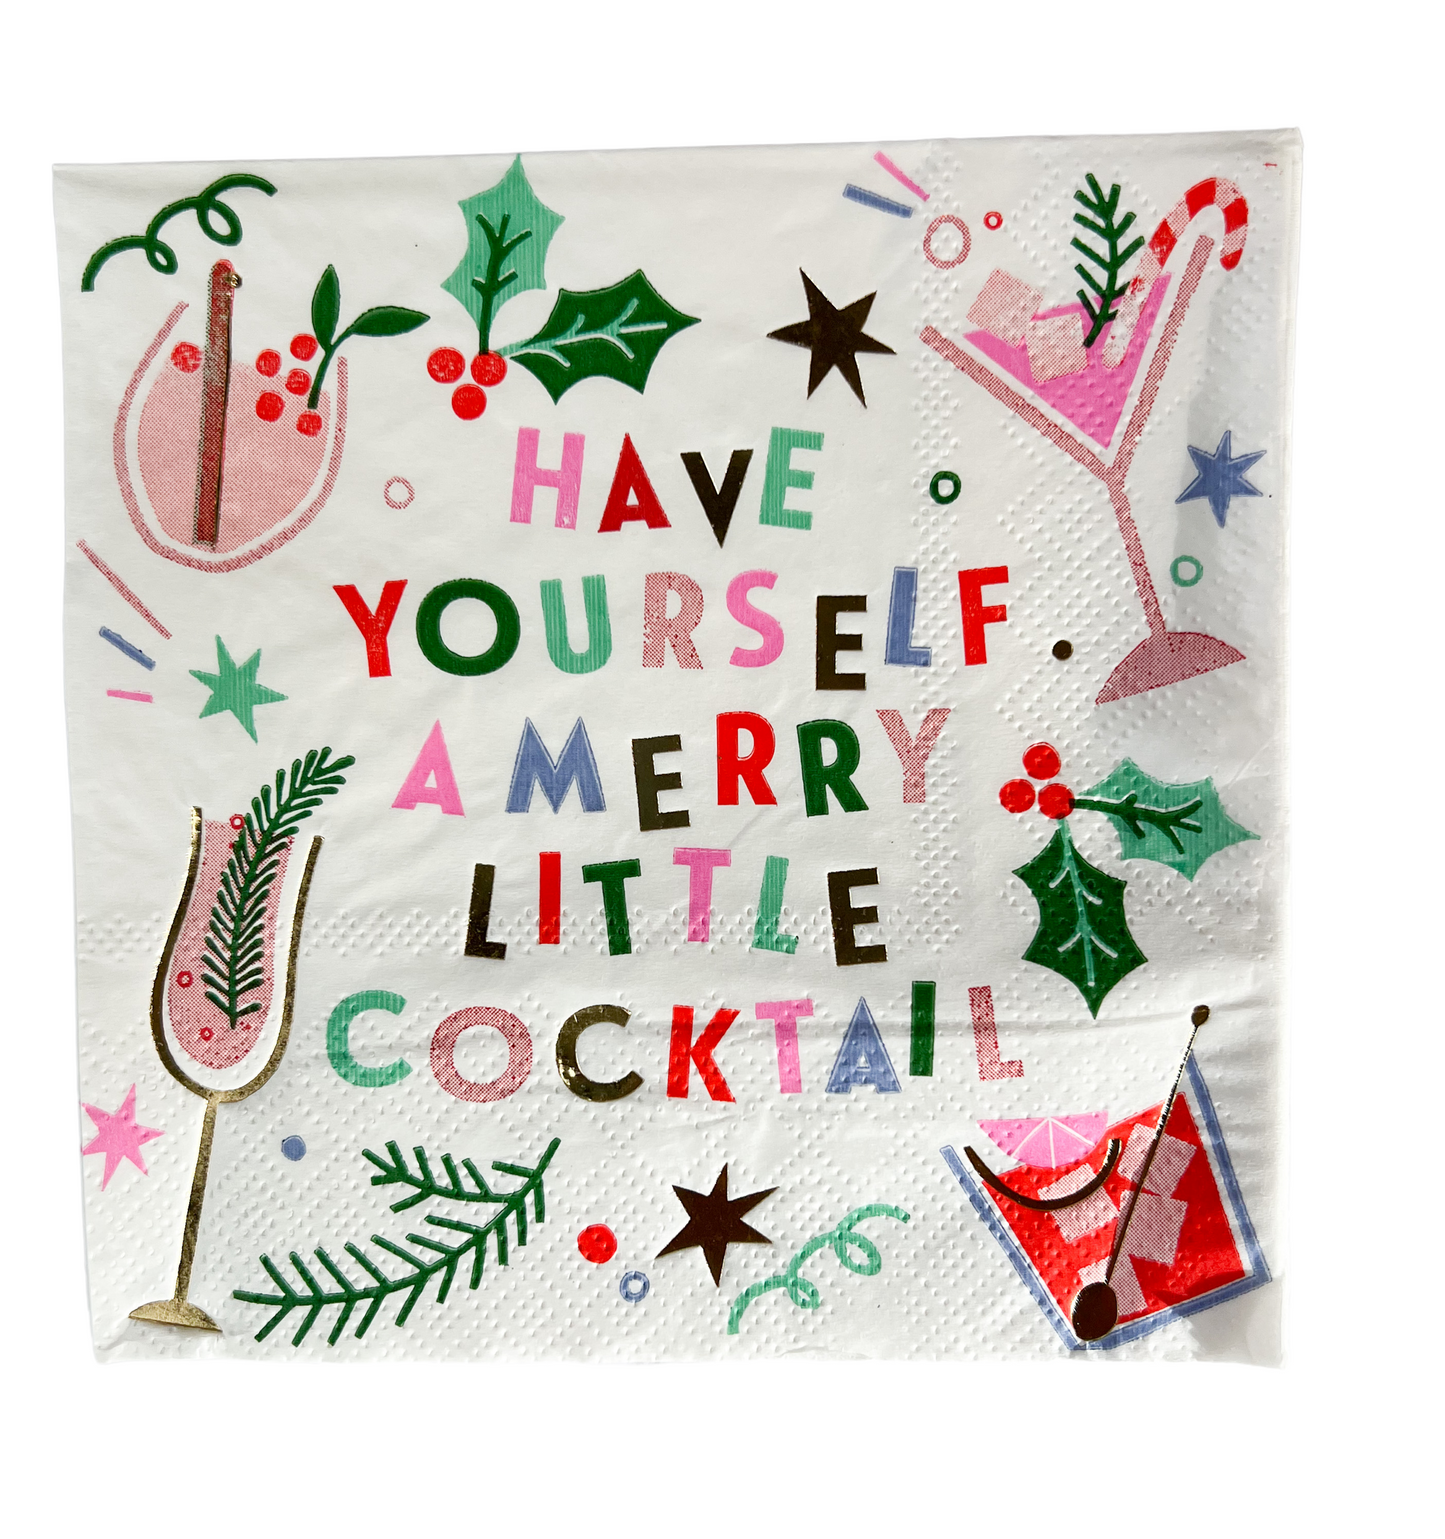 Merry Little Cocktail cocktail napkin